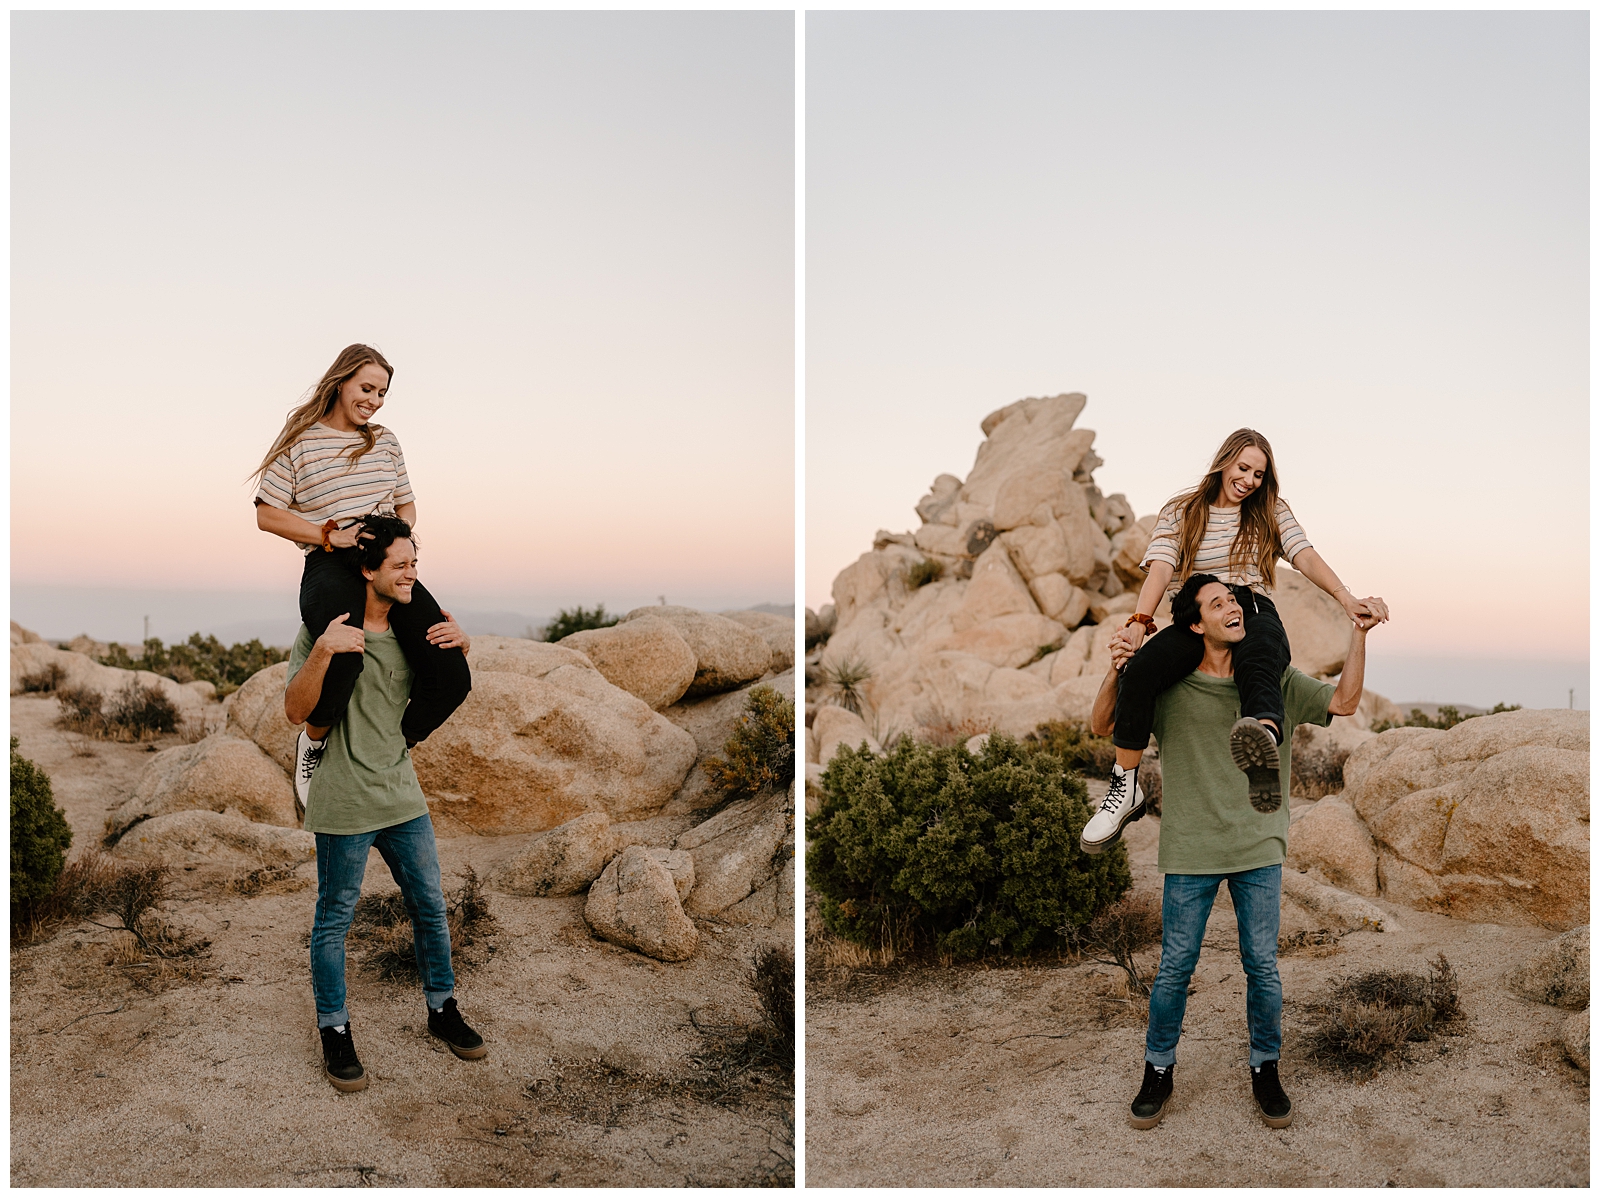 Wild and carefree couple in SoCal's desert by adventurous elopement photographer